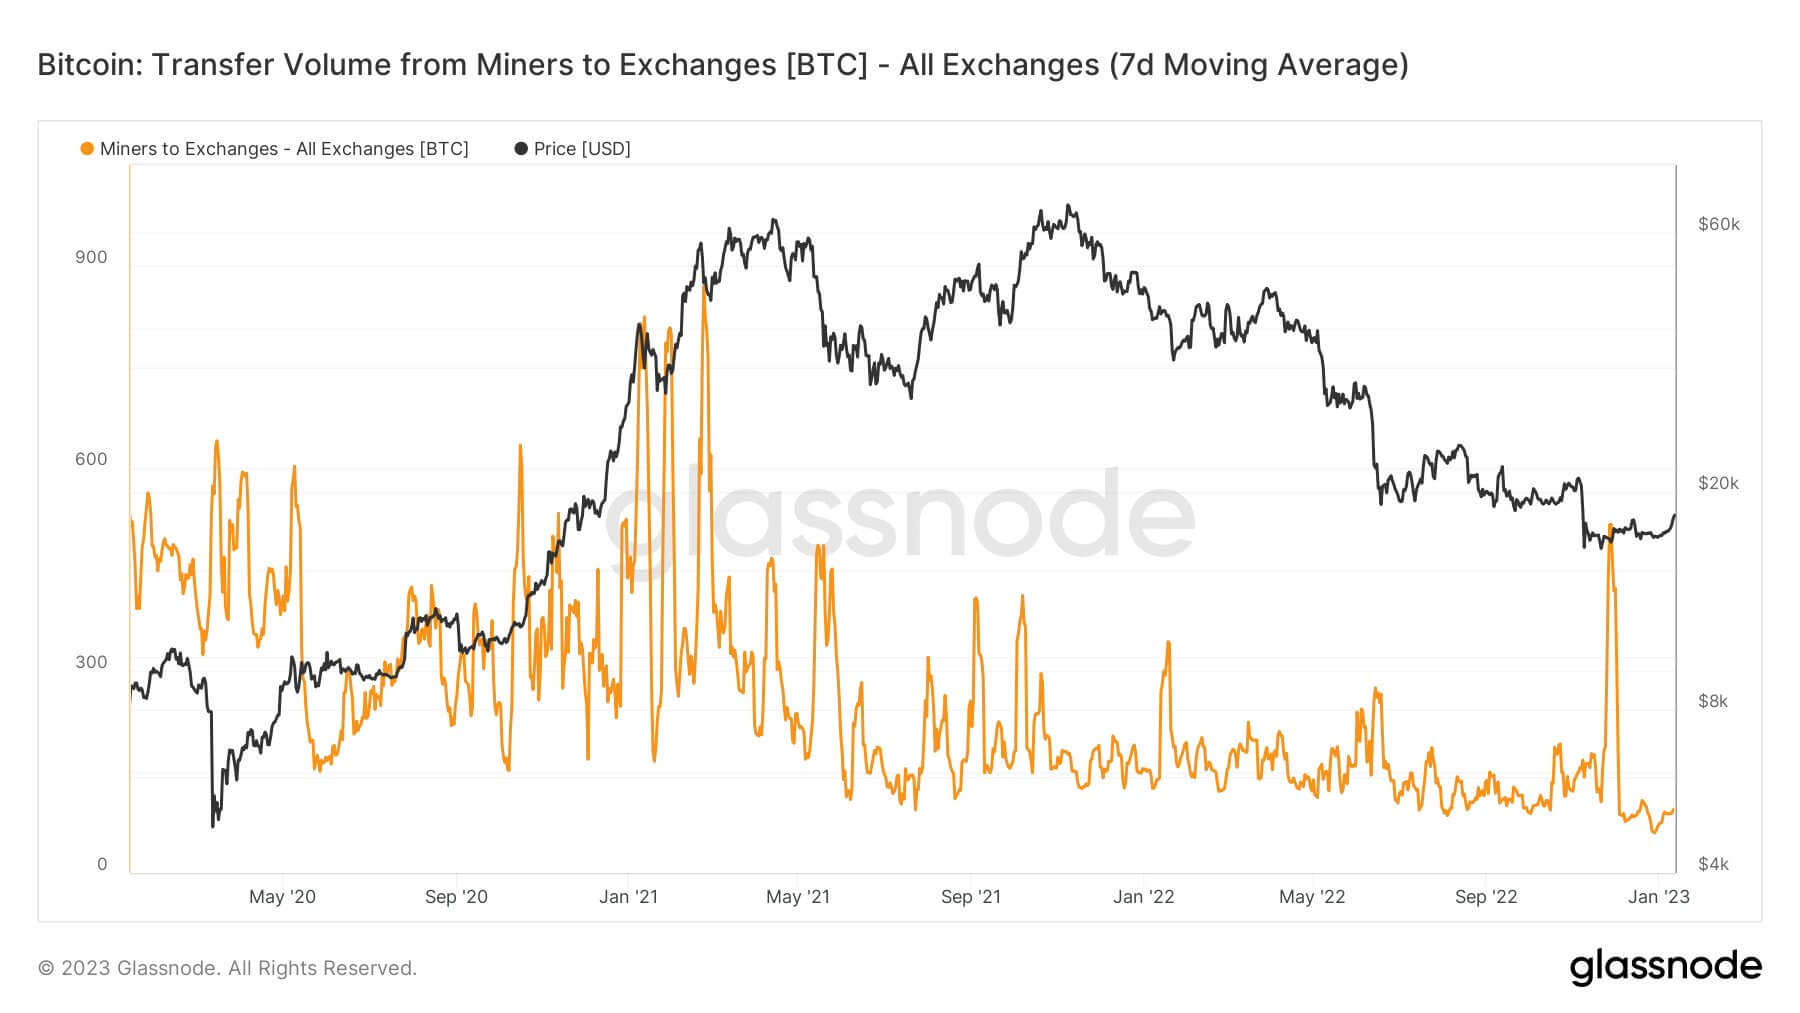 Bitcoin: Transfer Volume from Miners to Exchanges [BTC] - All Exchanges (7d Moving Average)